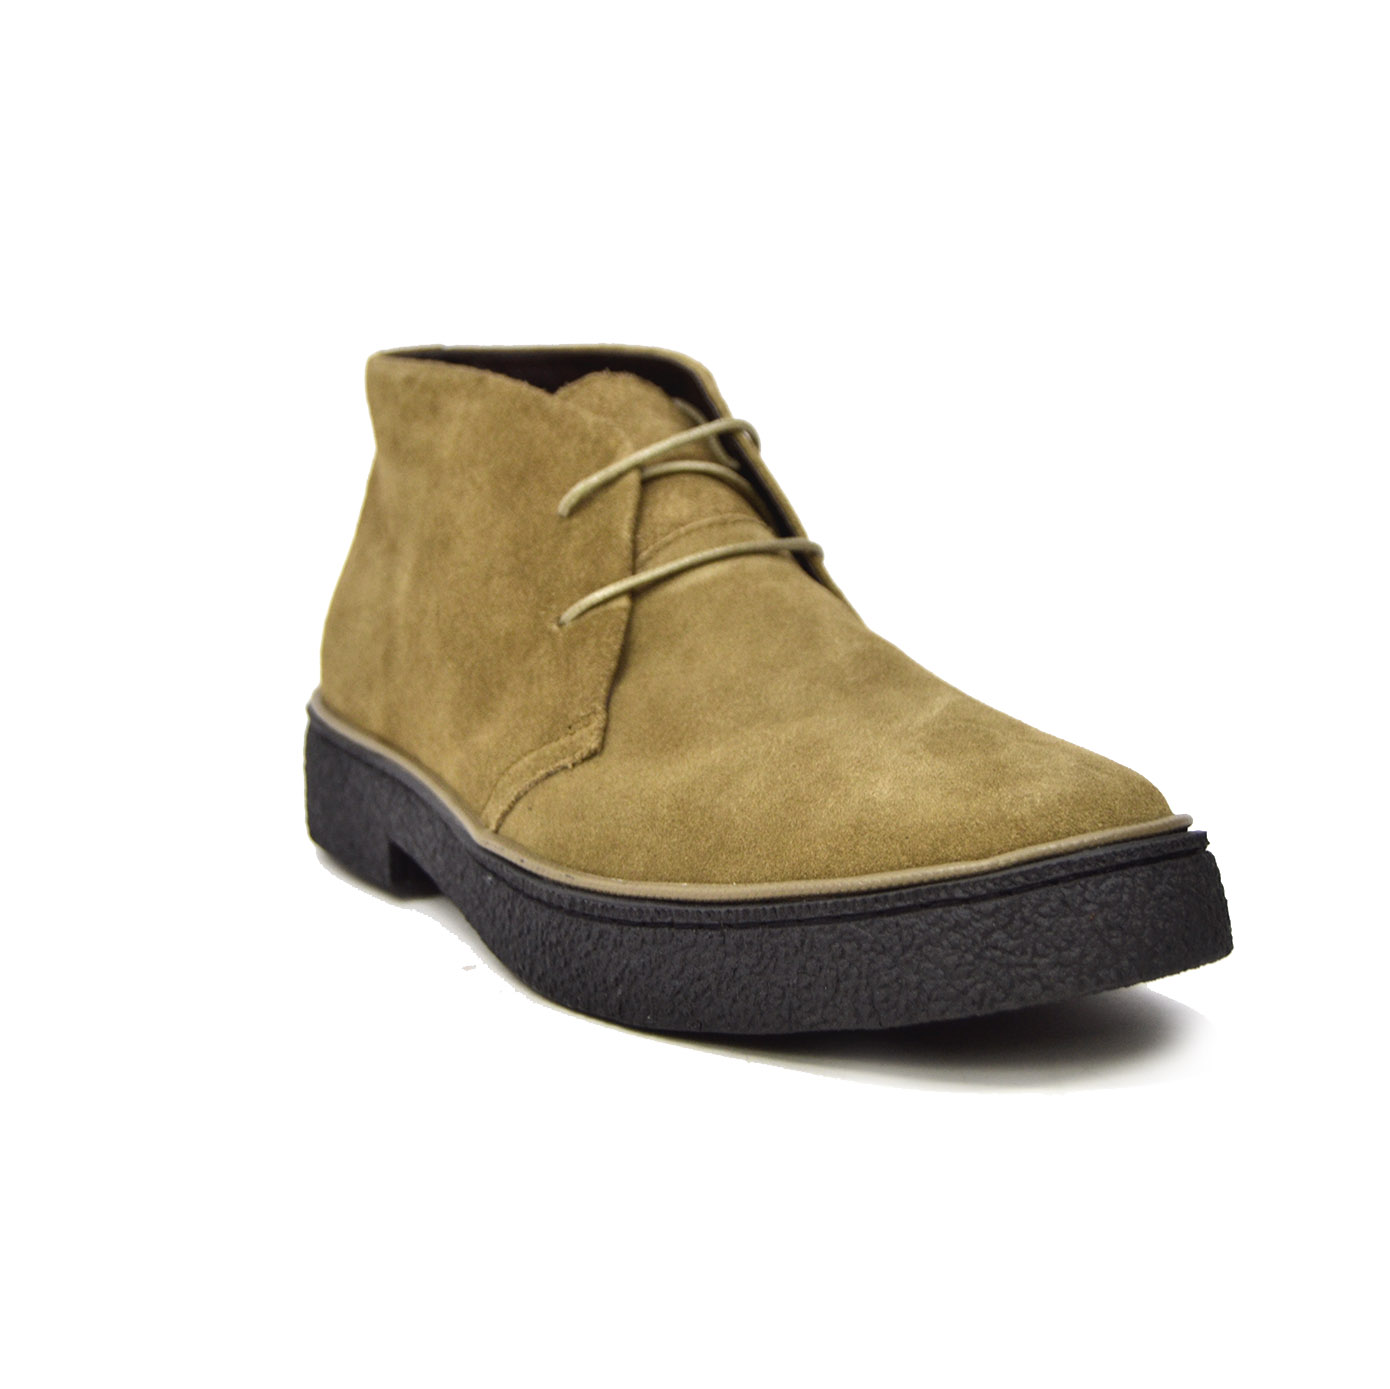 Classic Playboy Chukka Boot Olive Suede [1226-59] - $118.00 : British ...